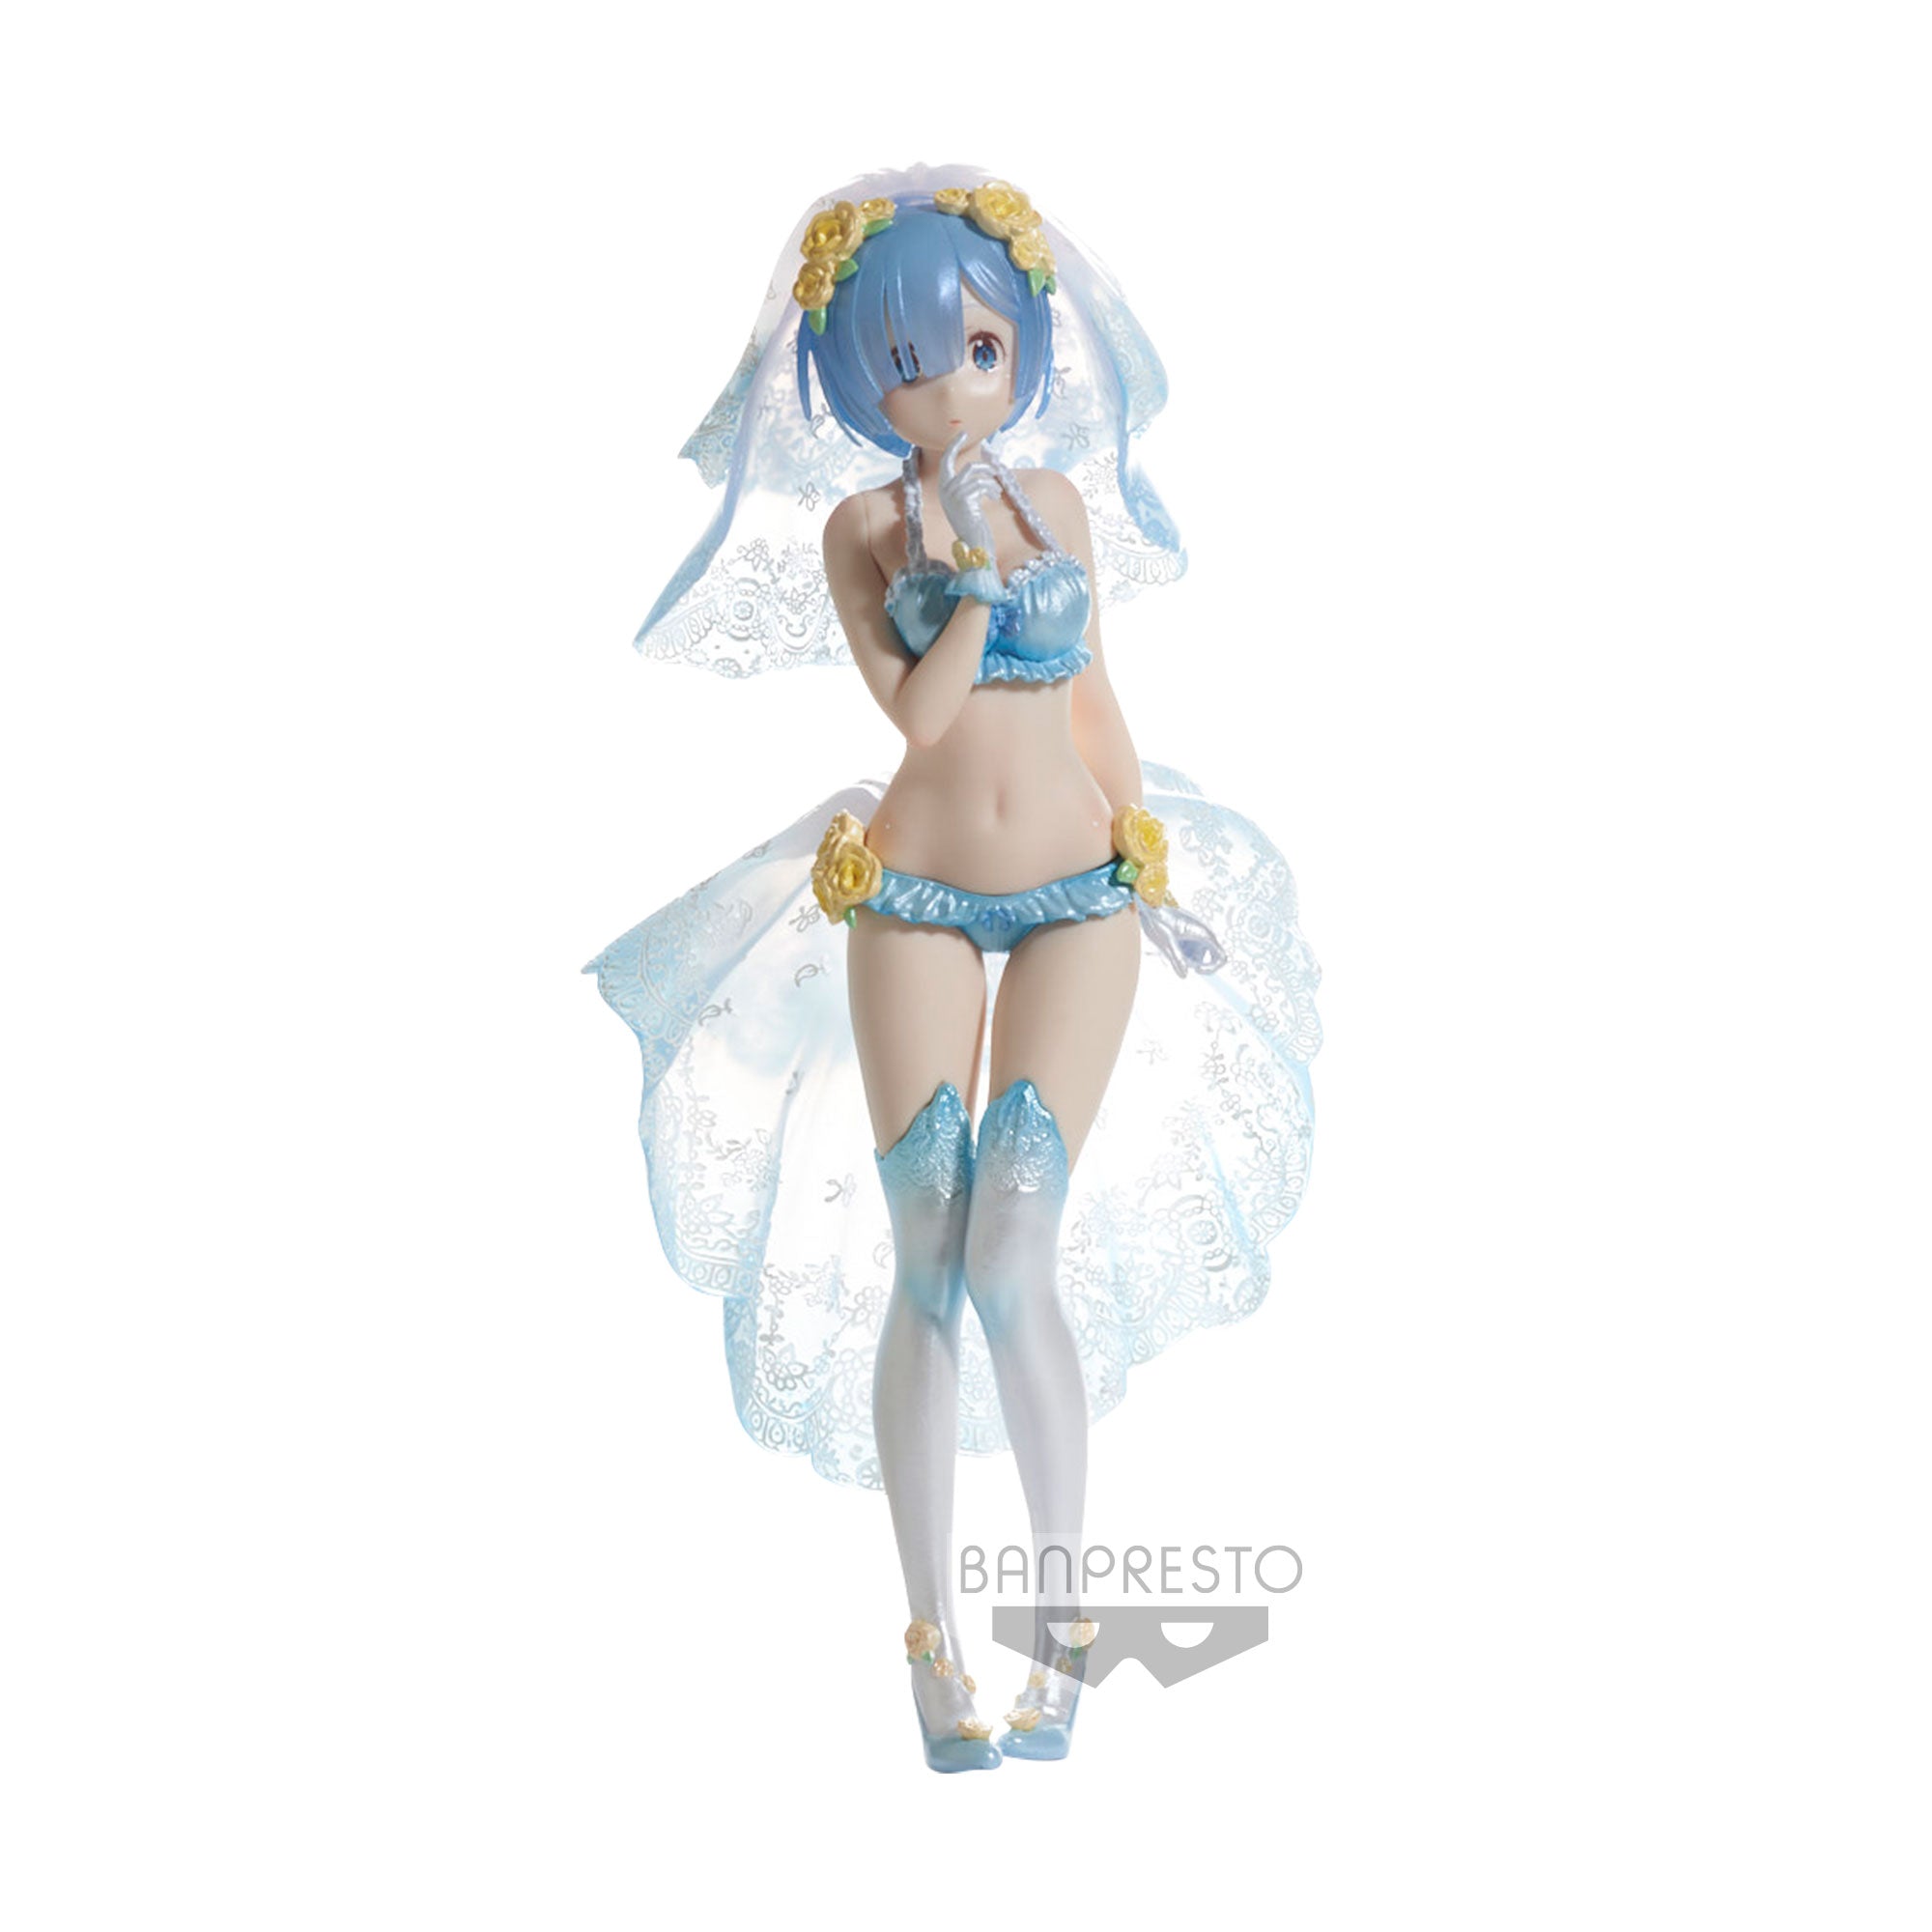 Re:Zero - Starting Life in Another World - Banpresto Chronicle EXQ REM Special Color Figure 22cm